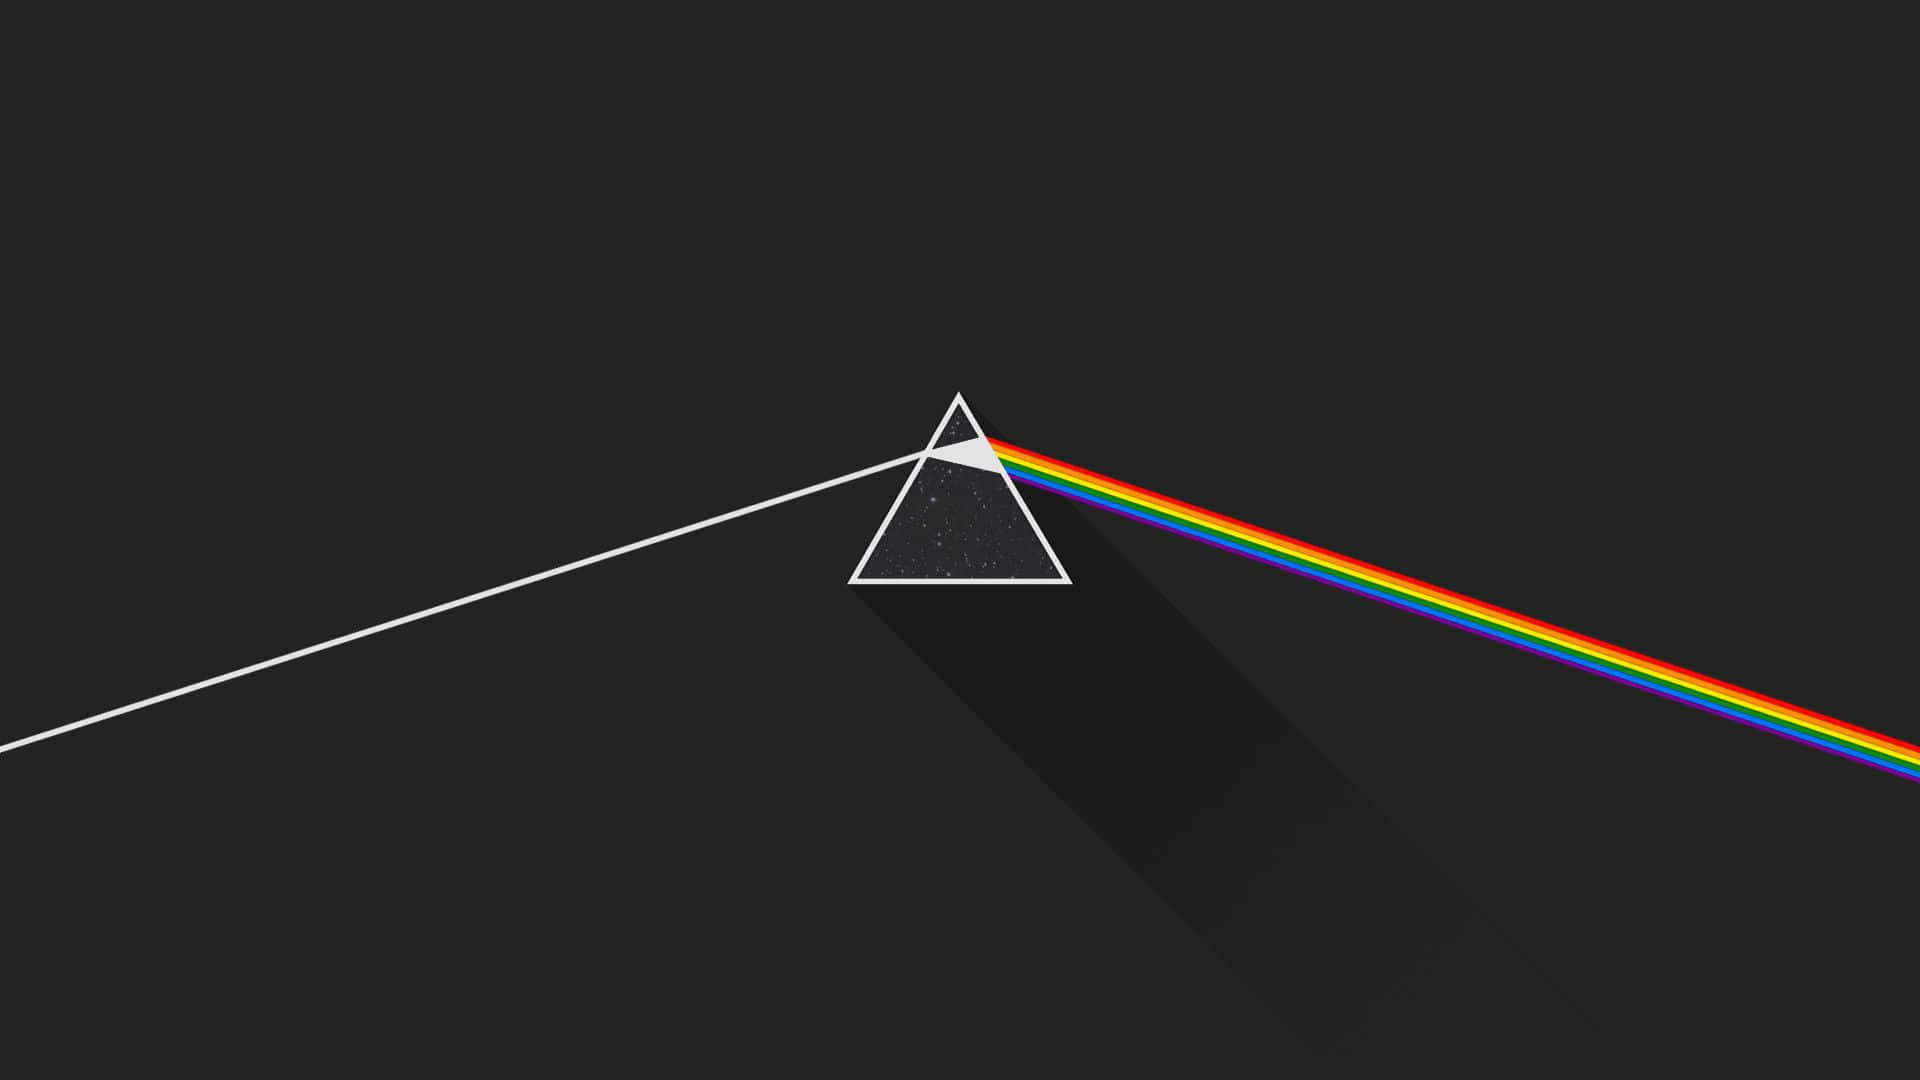 Immersive music experience by Pink Floyd in The Wall Wallpaper